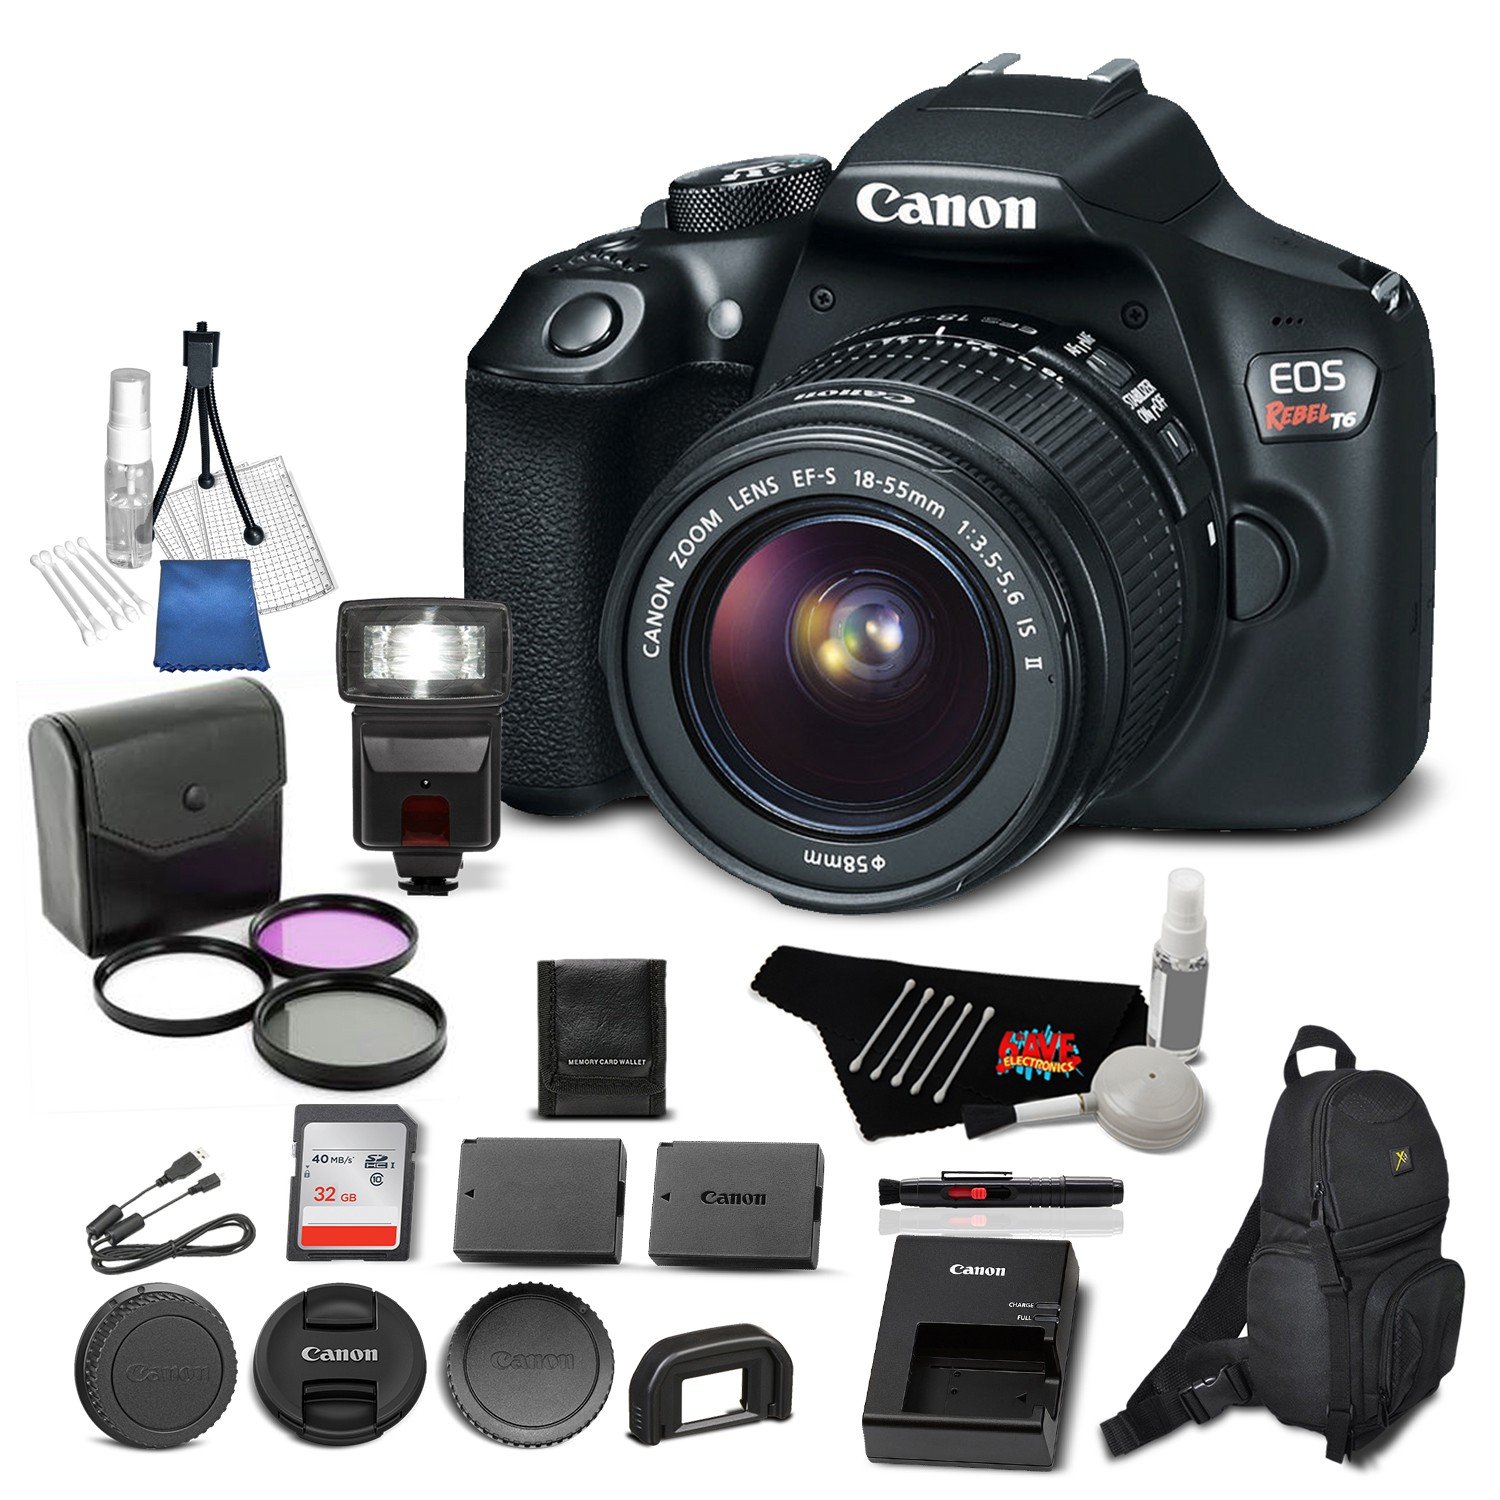 Canon EOS Rebel T6 Digital SLR Camera Bundle with EF-S 18-55mm f/3.5-5.6 is II Lens with 32GB Memory Card + Filter Kit +